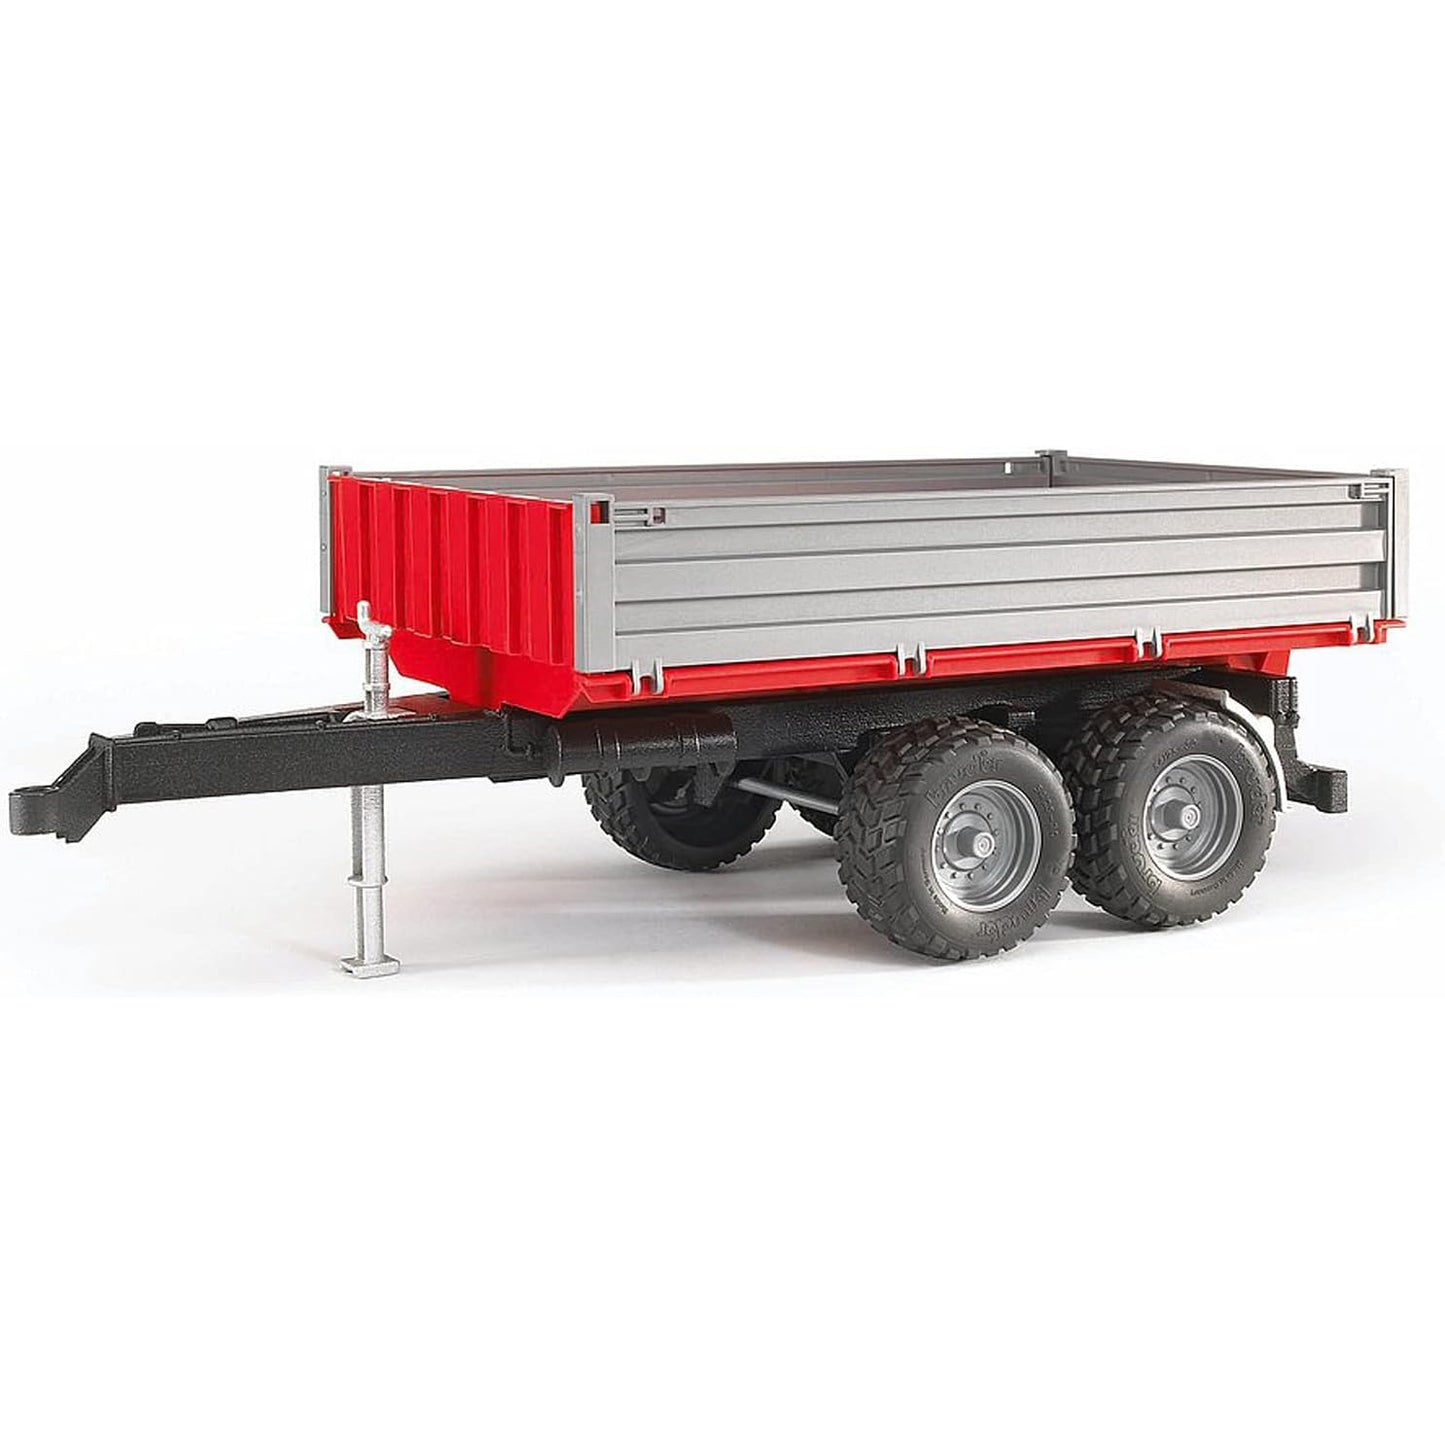 Bruder 02019 Tipping Trailer Accessory, 1:16 Scale